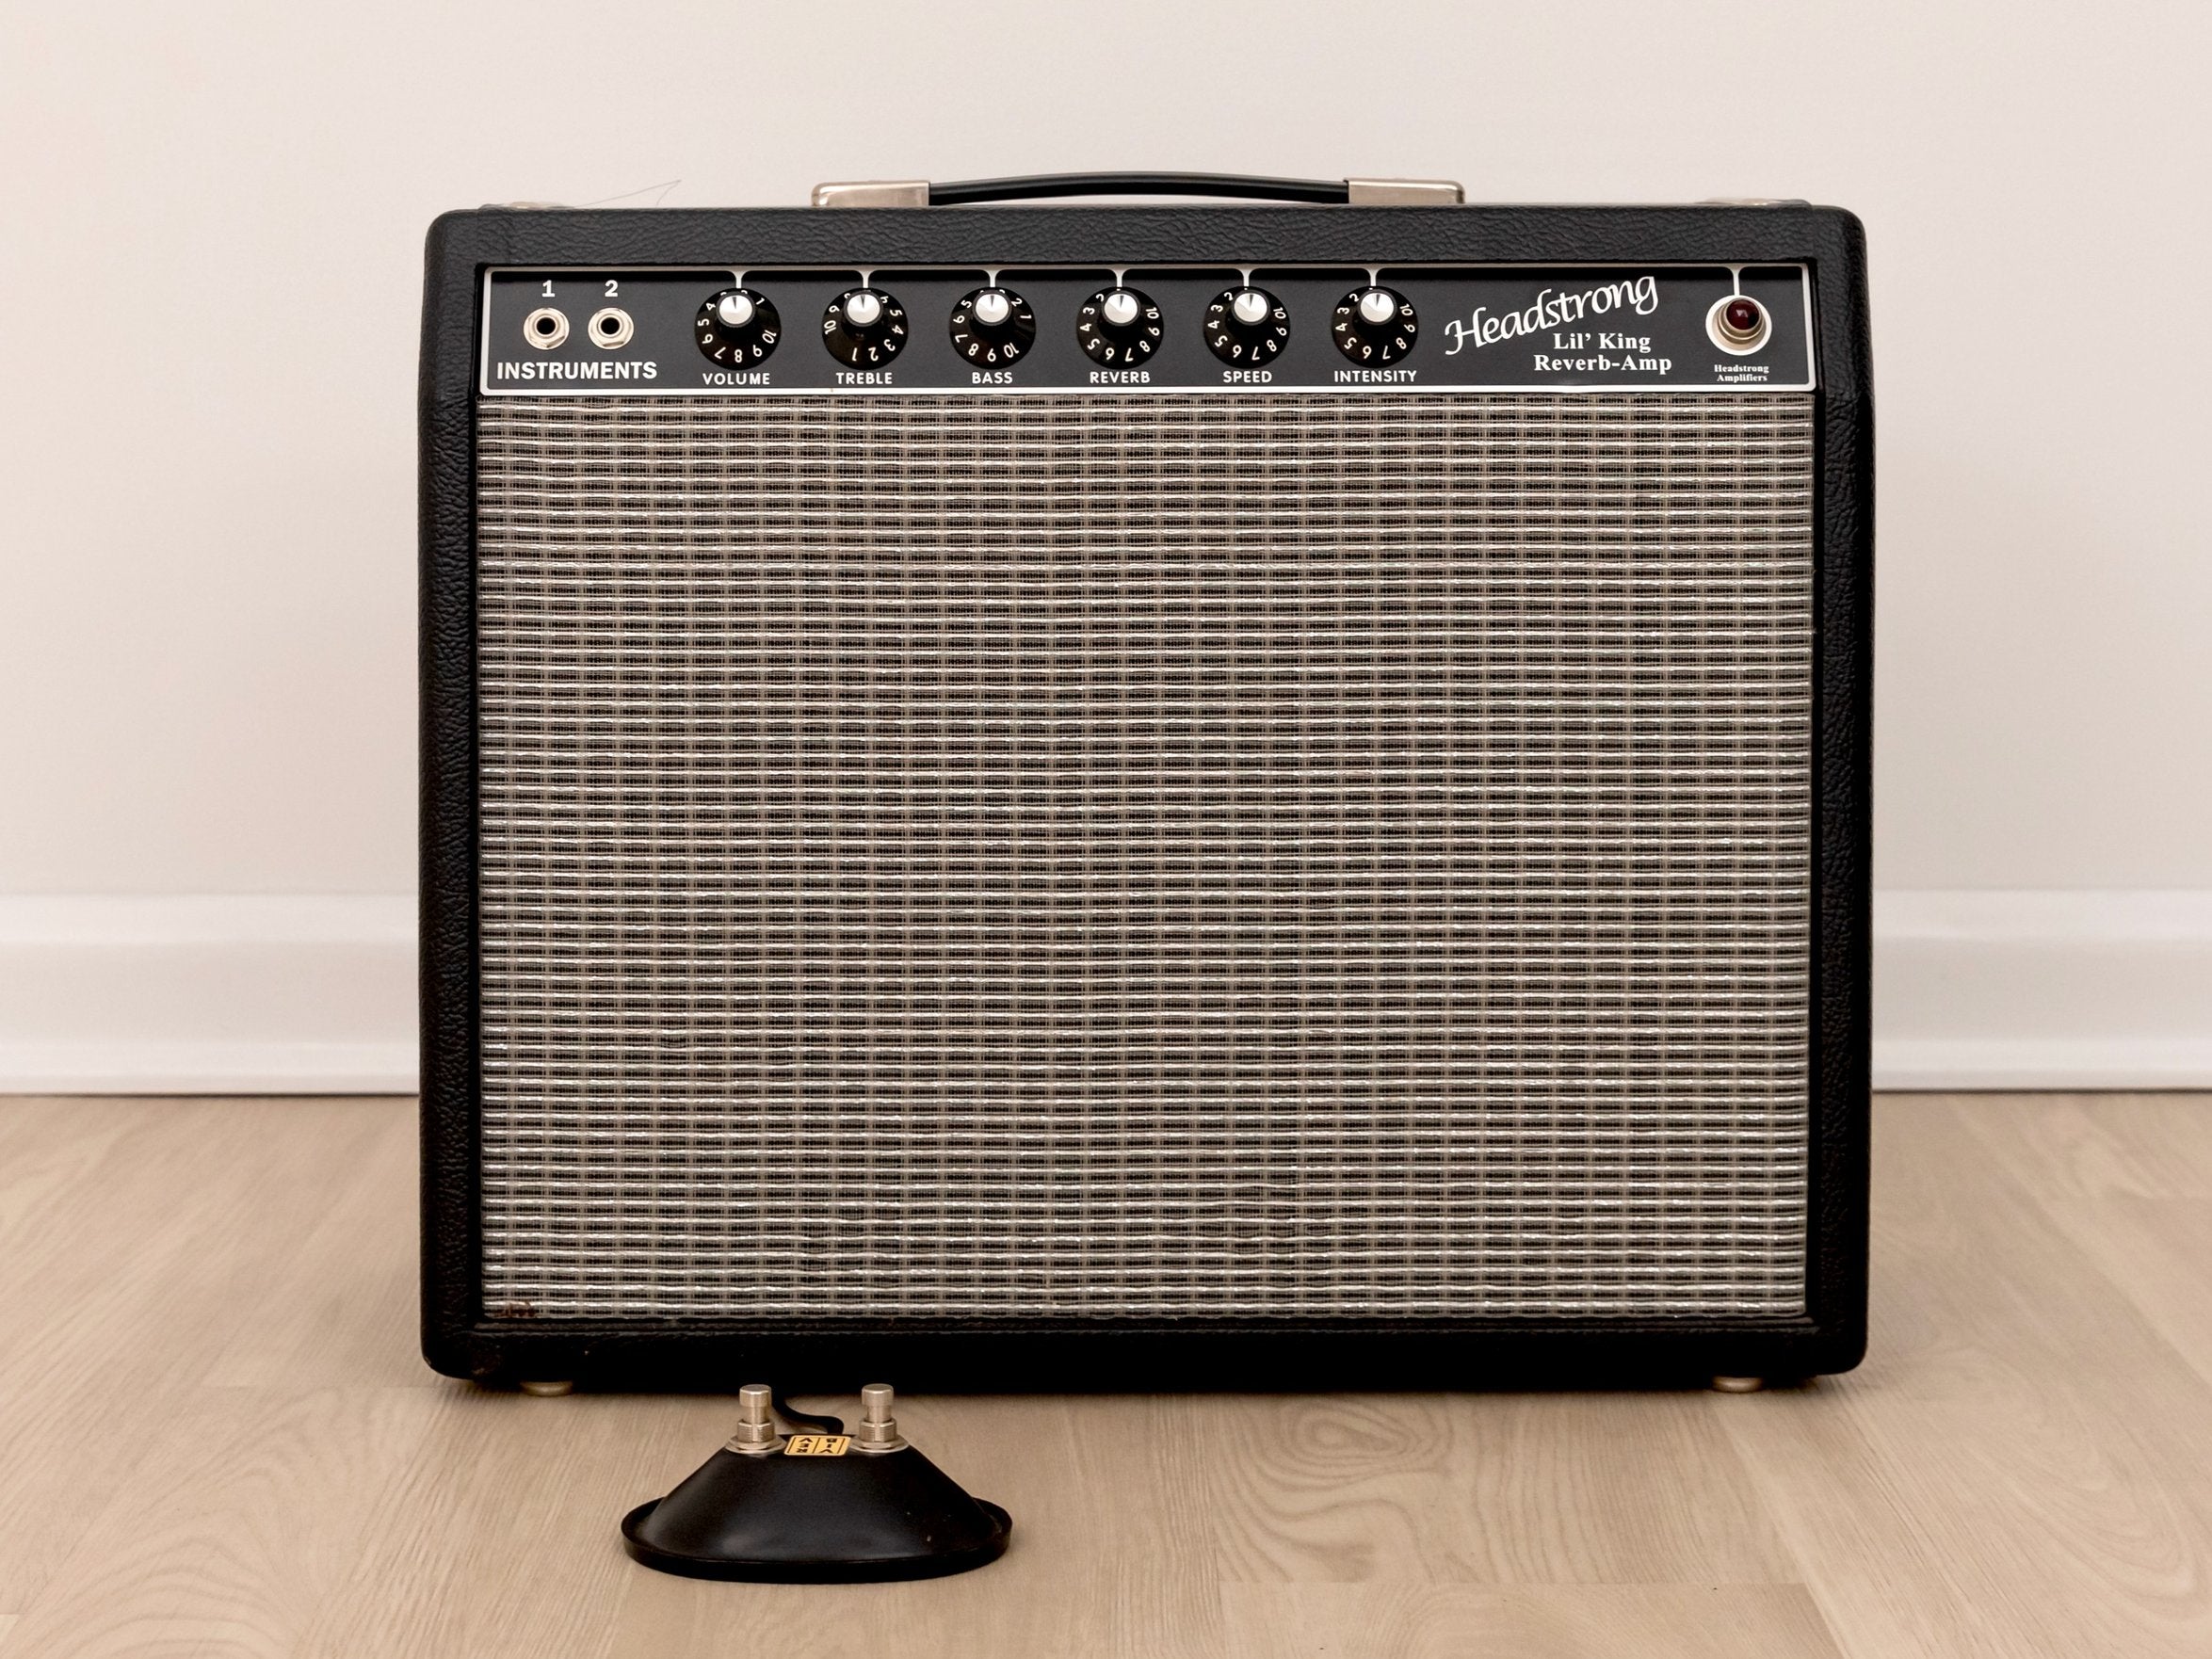 2009 Headstrong Lil' King Reverb Boutique Hand-Wired 1x12 Black Panel Princeton-Style Tube Amp w/ Cover, Ftsw